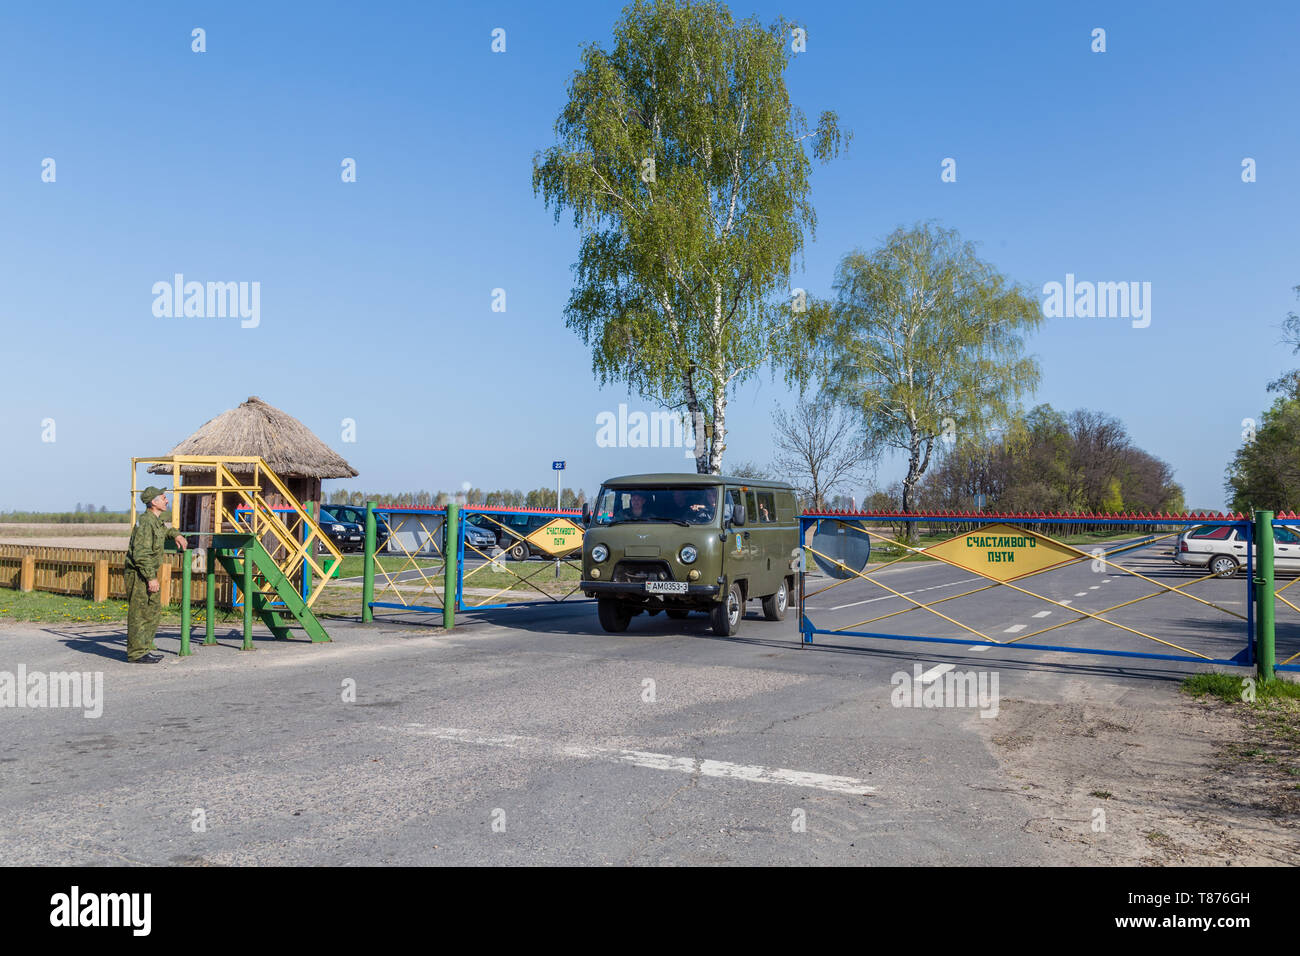 Chojniki, Belarus, - April 26, 2019: Entering the exclusion zone of Chernobyl accident area in Belarus contaminated with radioactive fallout in 1986. Stock Photo